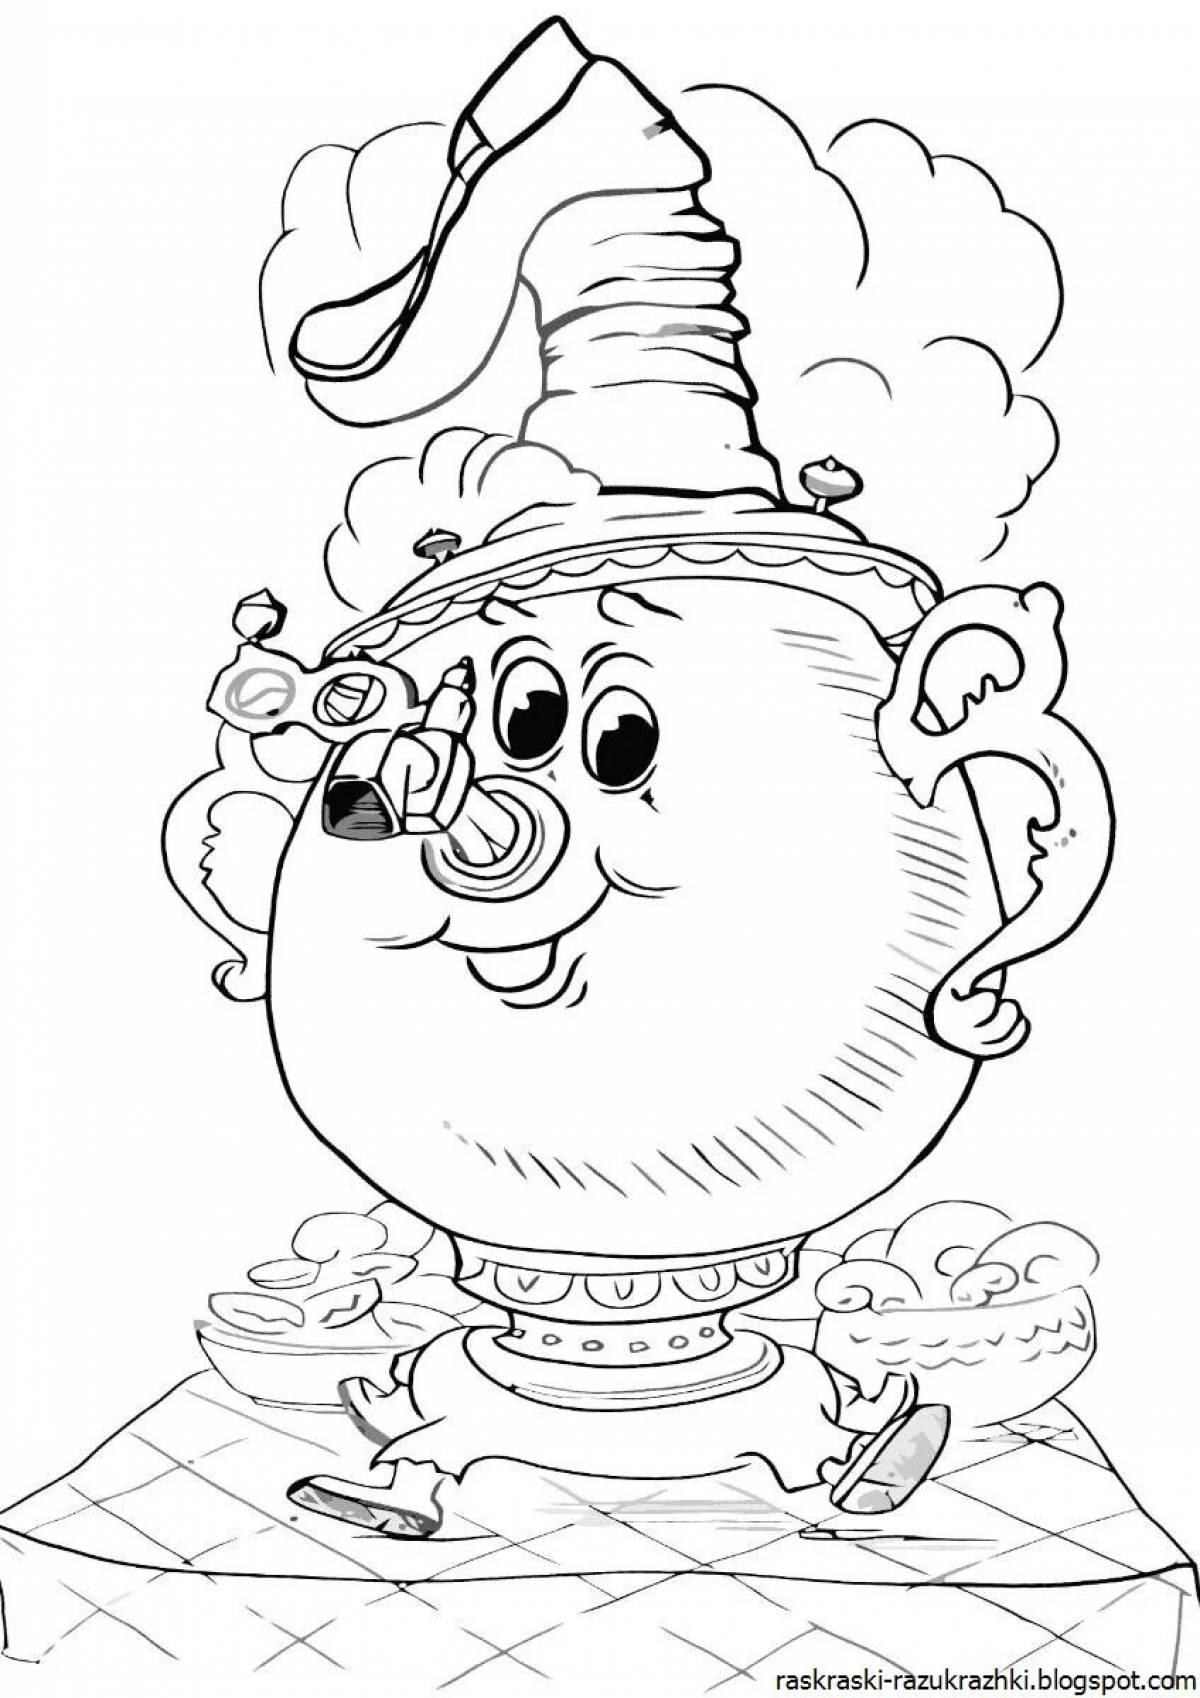 A wonderful samovar coloring book for children 5-6 years old